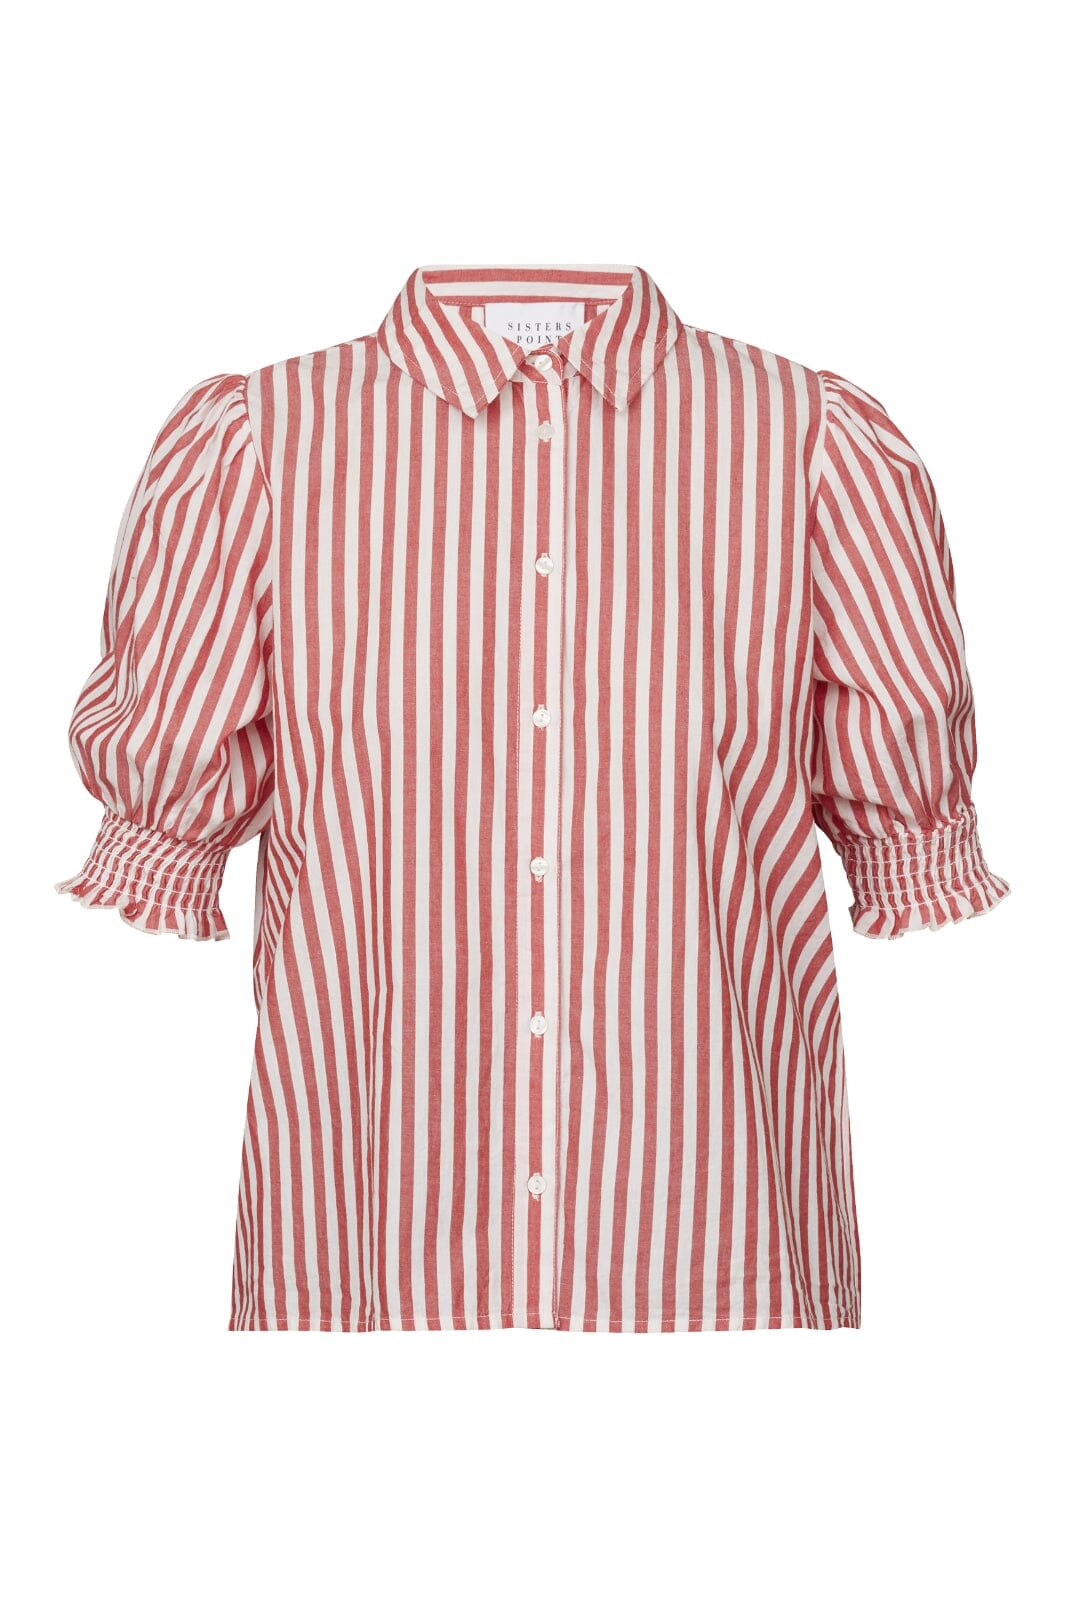 Sisters Point - Isola-Ss1 - 800 Red/White Bluser 